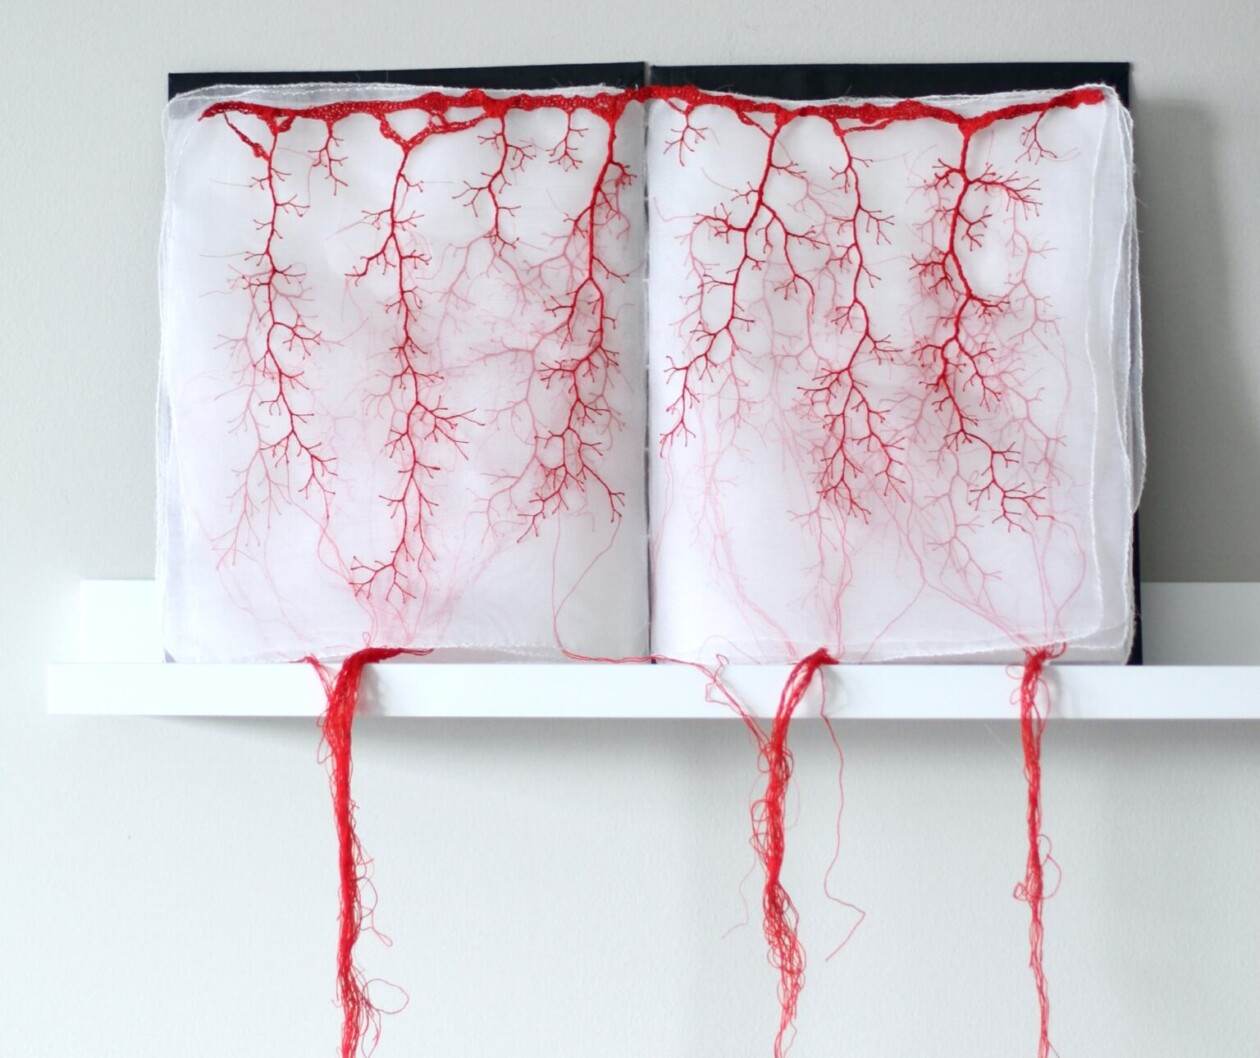 Red Threads, Intriguing Mixed Media Sculptures By Rima Day (5)